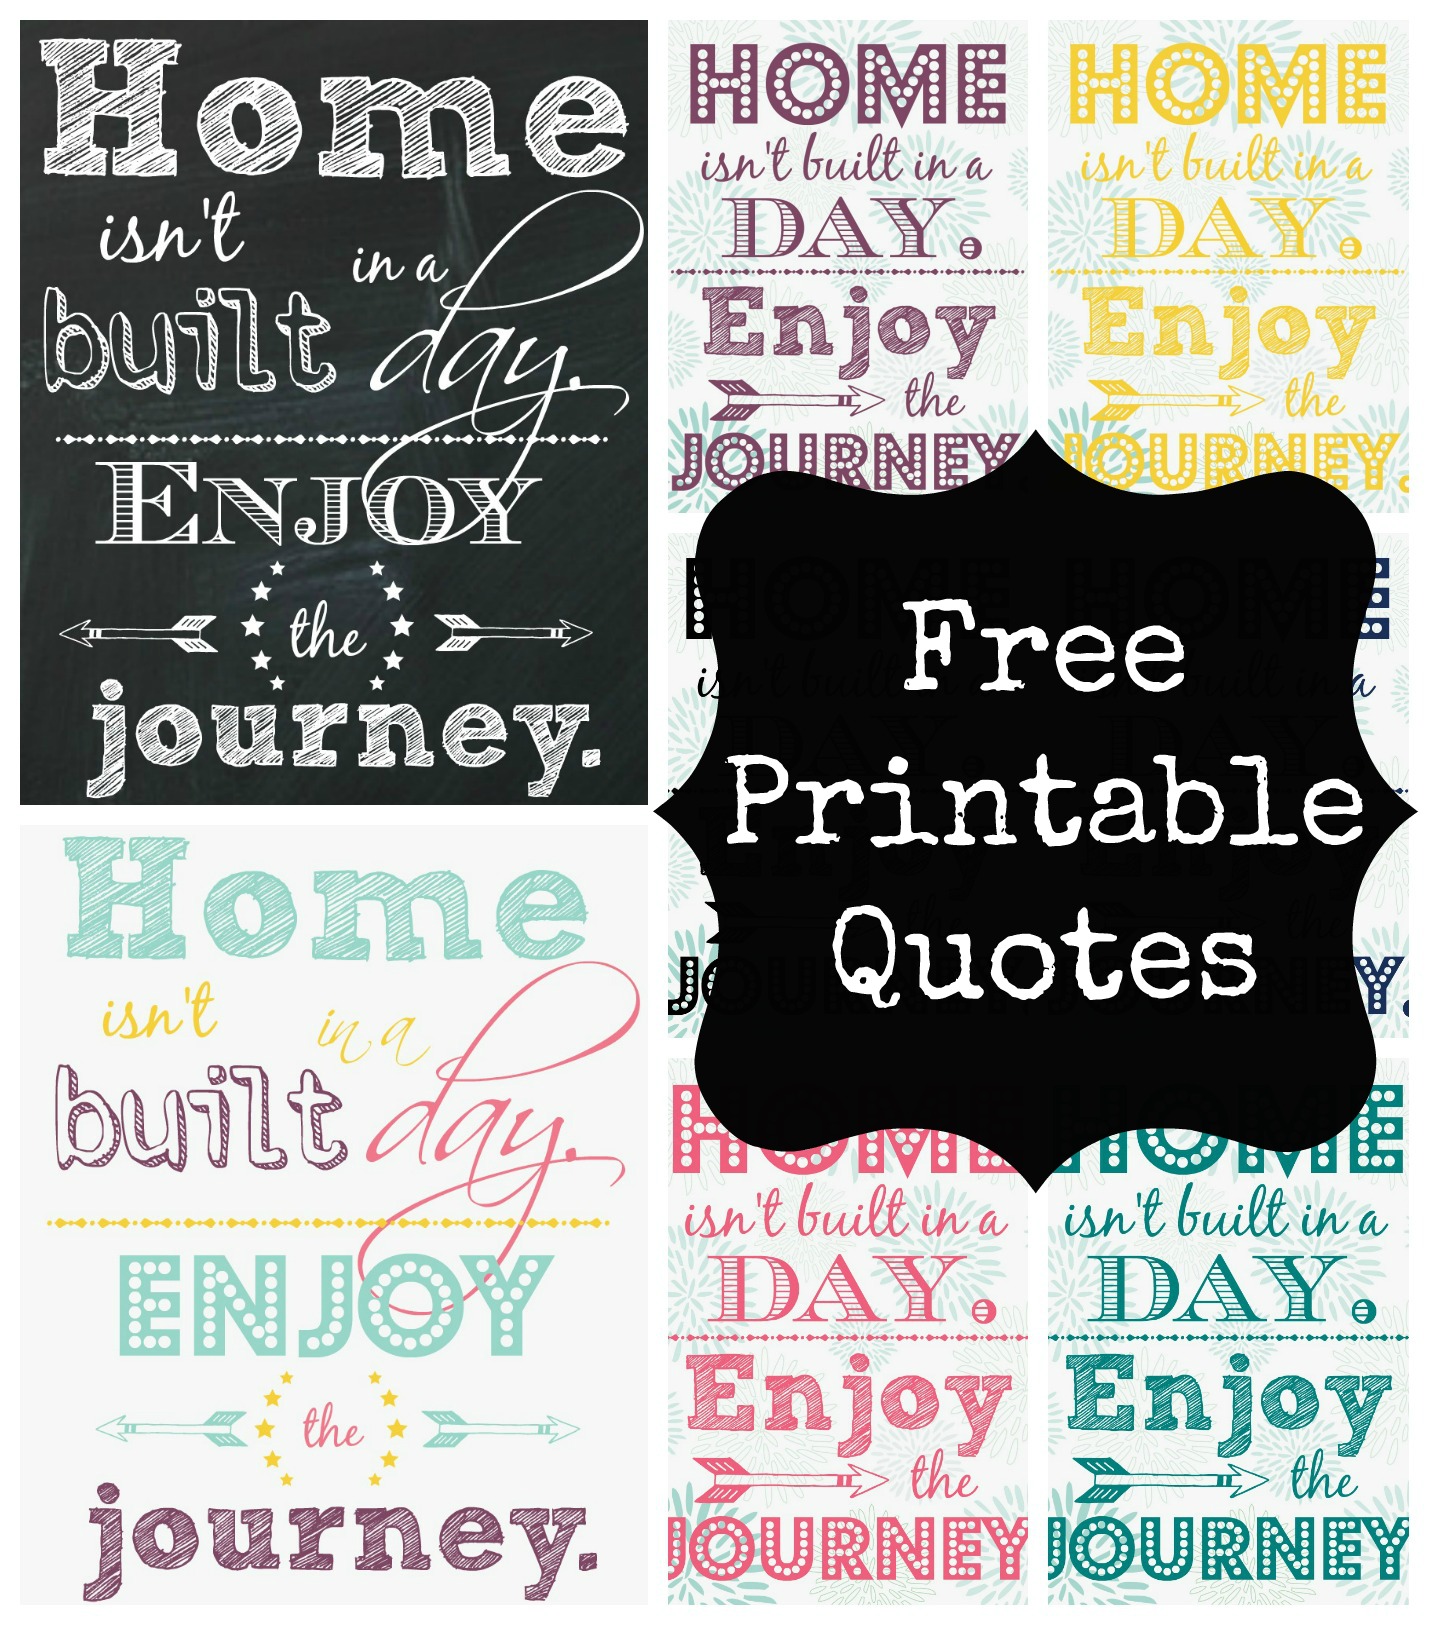 Celebrating My One Year Blogiversary with Free Printables Quotes!